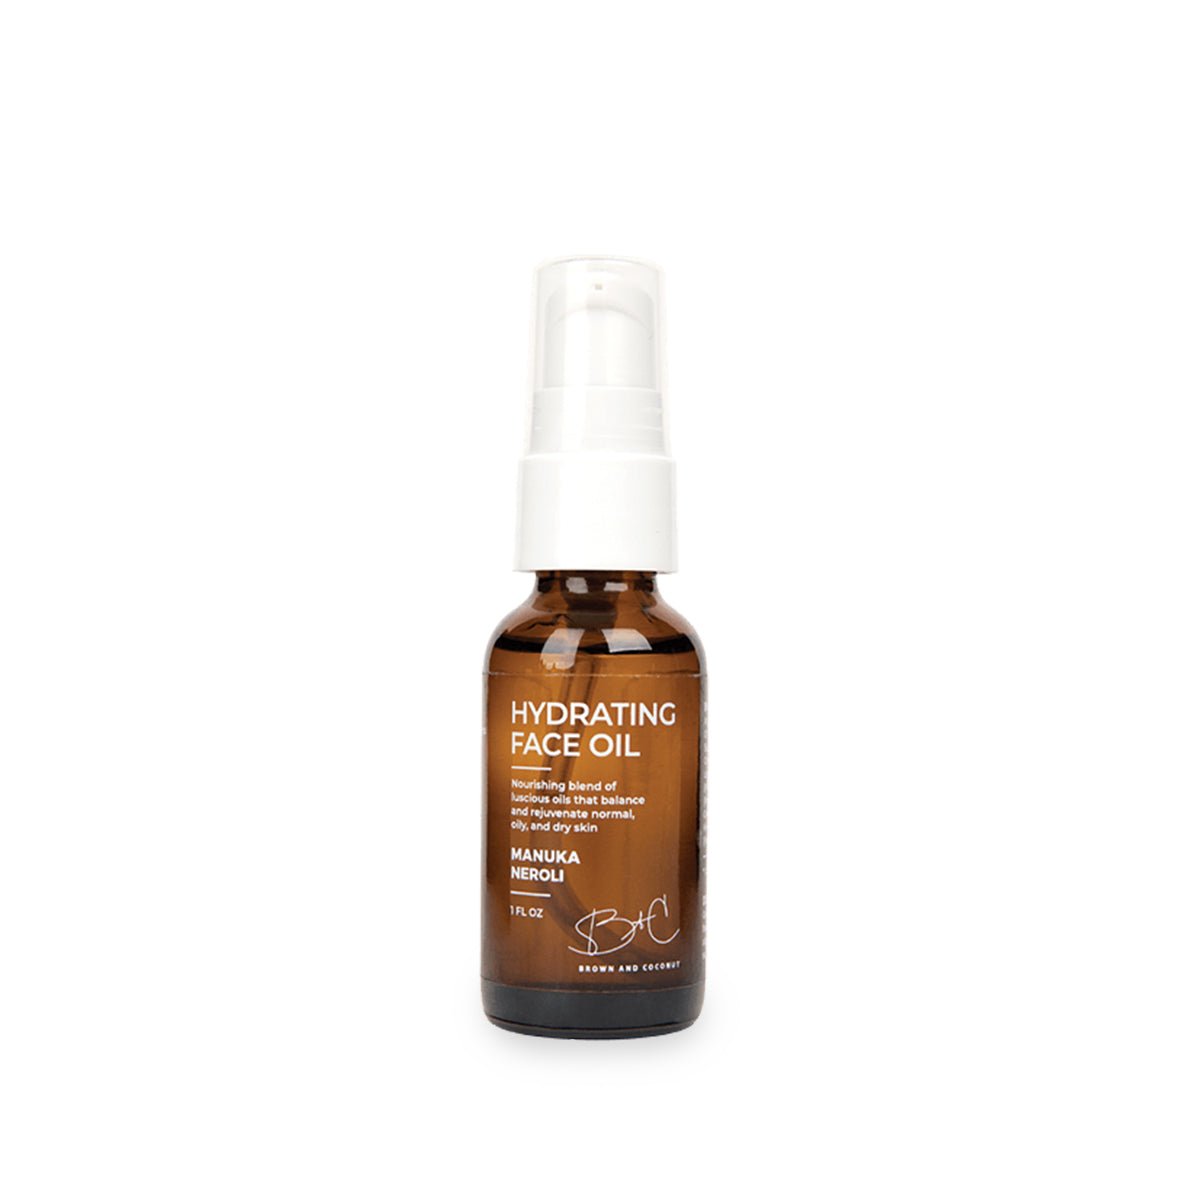 Hydrating Face Oil from Brown & Coconut. Made in USA.